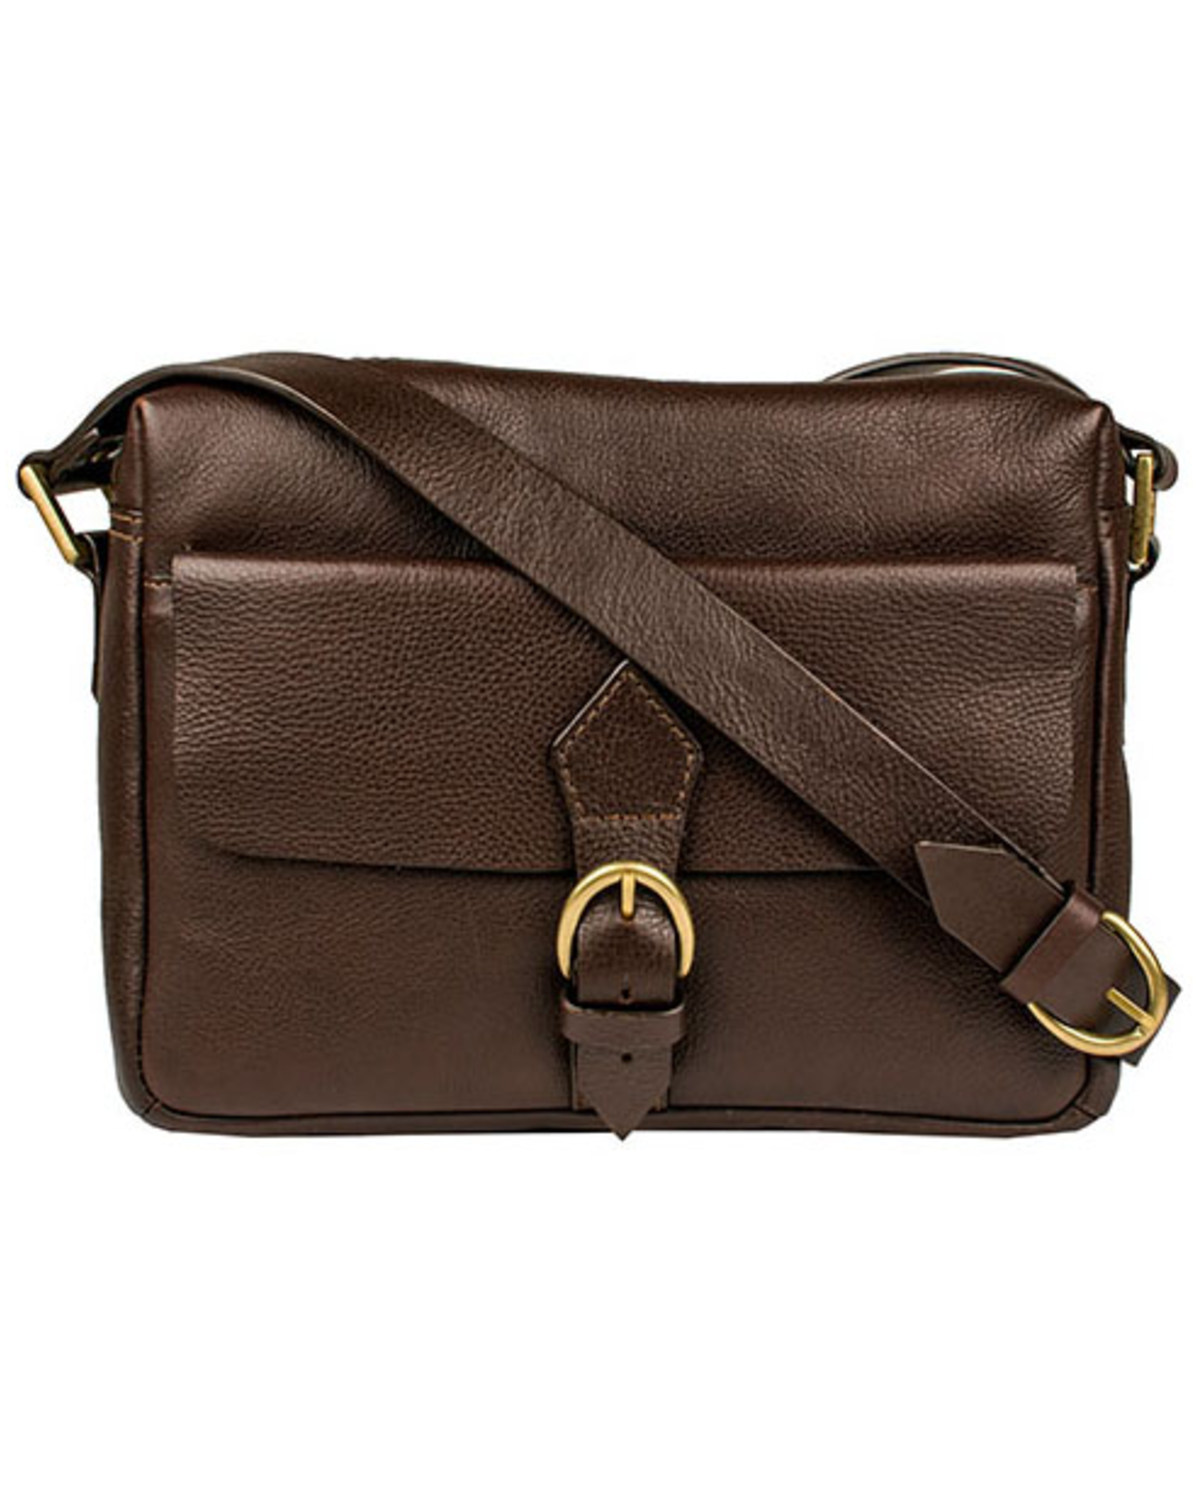 Scully Women's Messenger Brief Bag